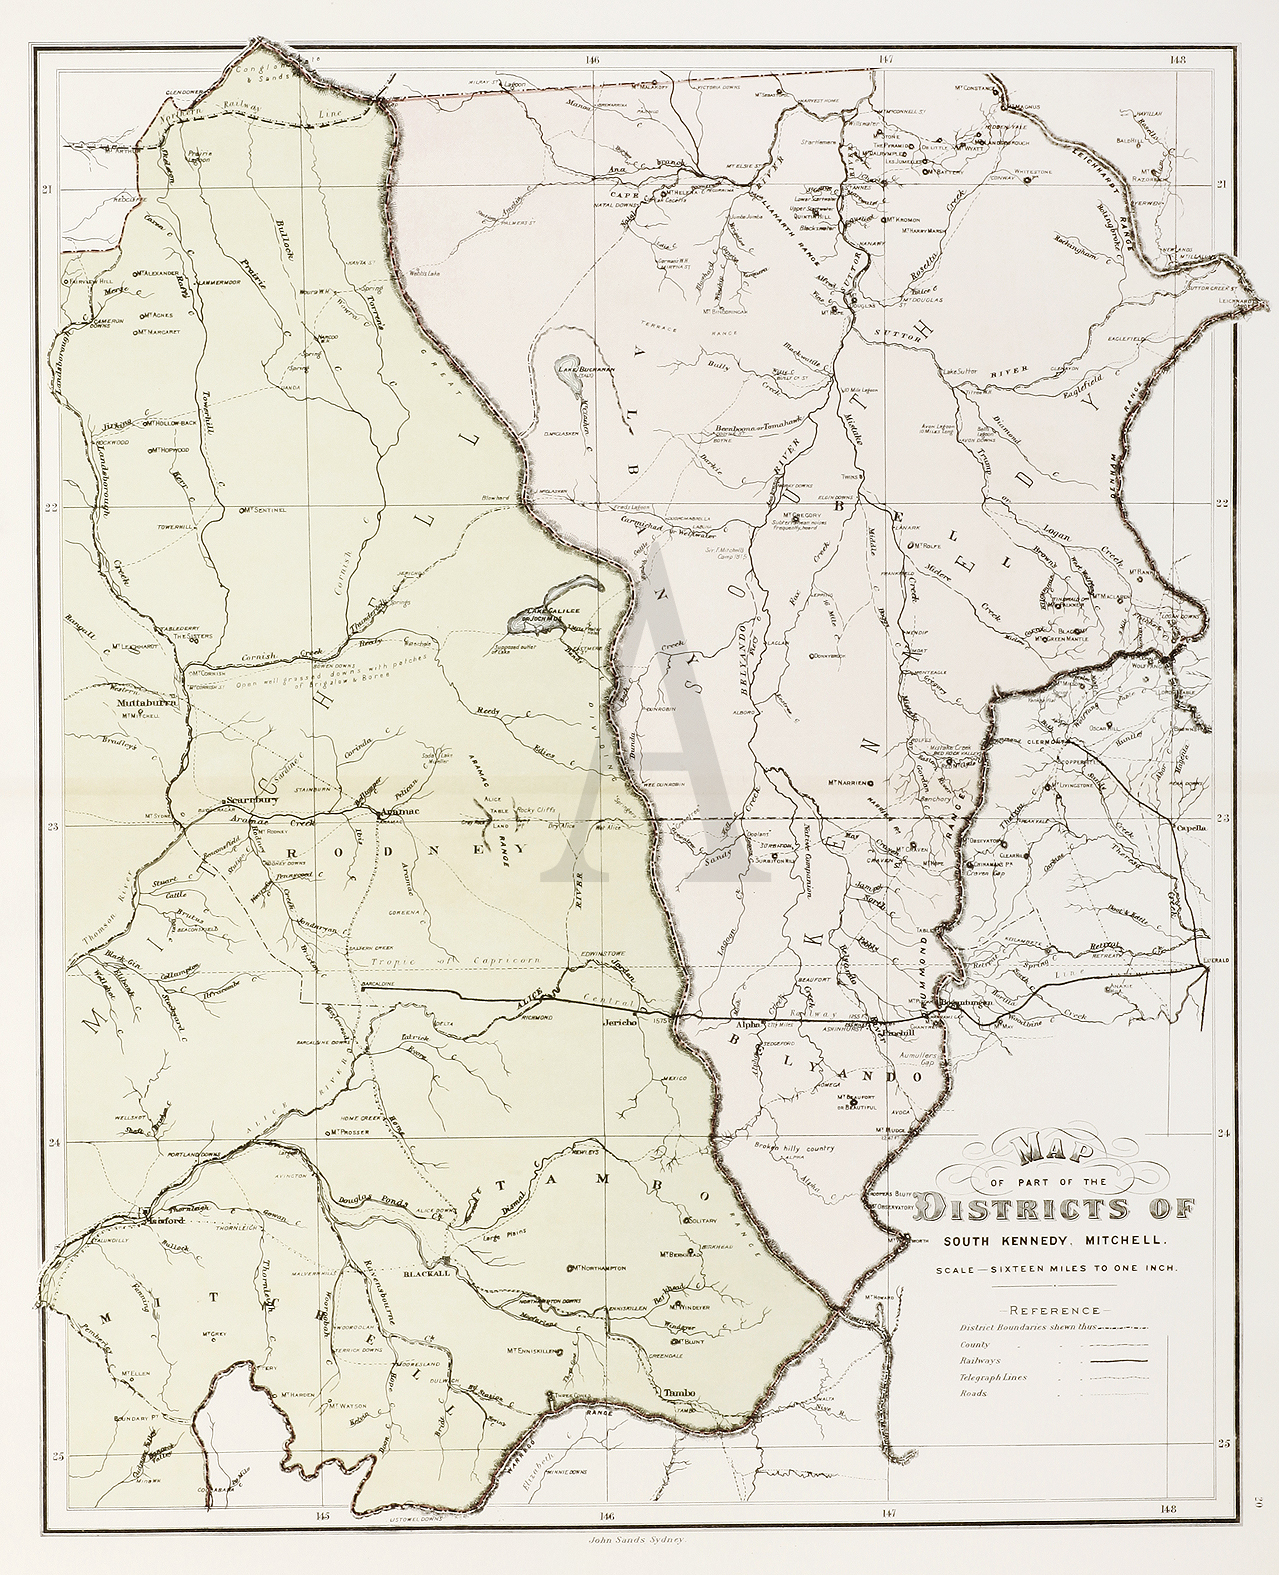 Map of part of the Districts of South Kennedy, Mitchell. - Antique Map from 1886